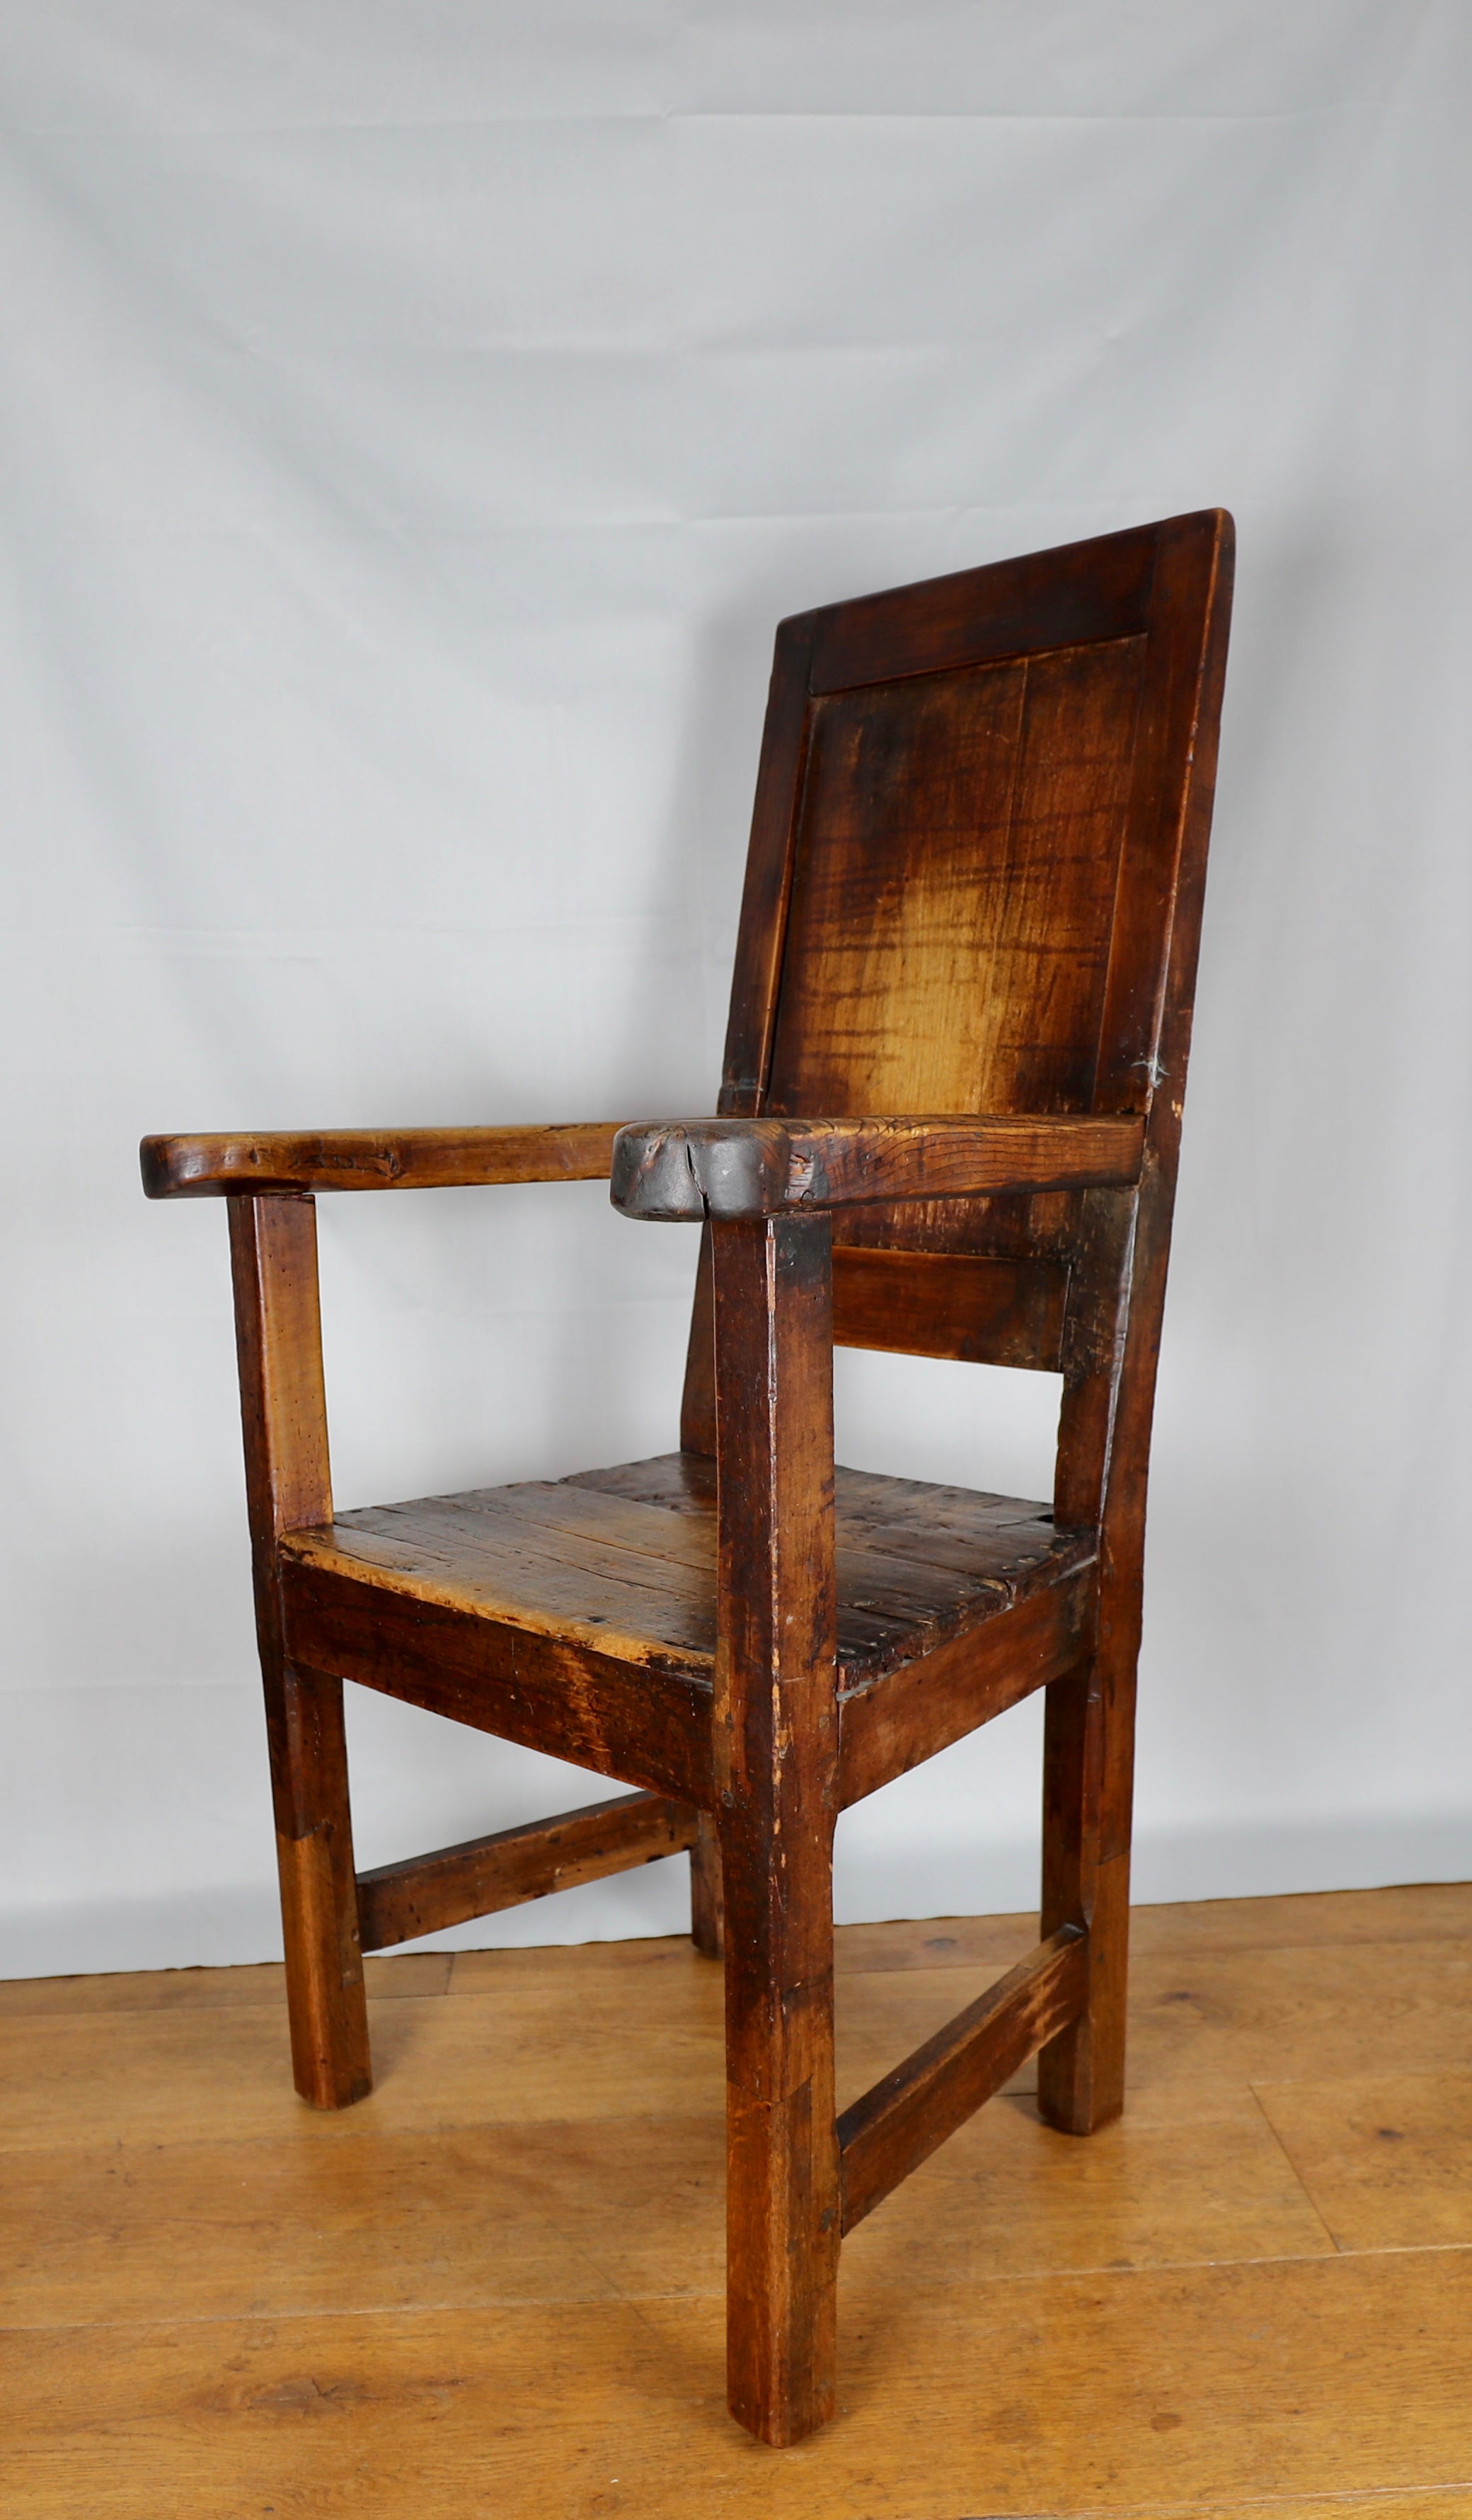 UNIQUE OAK CHAIR FROM THE NETHERLANDS, CA 1750